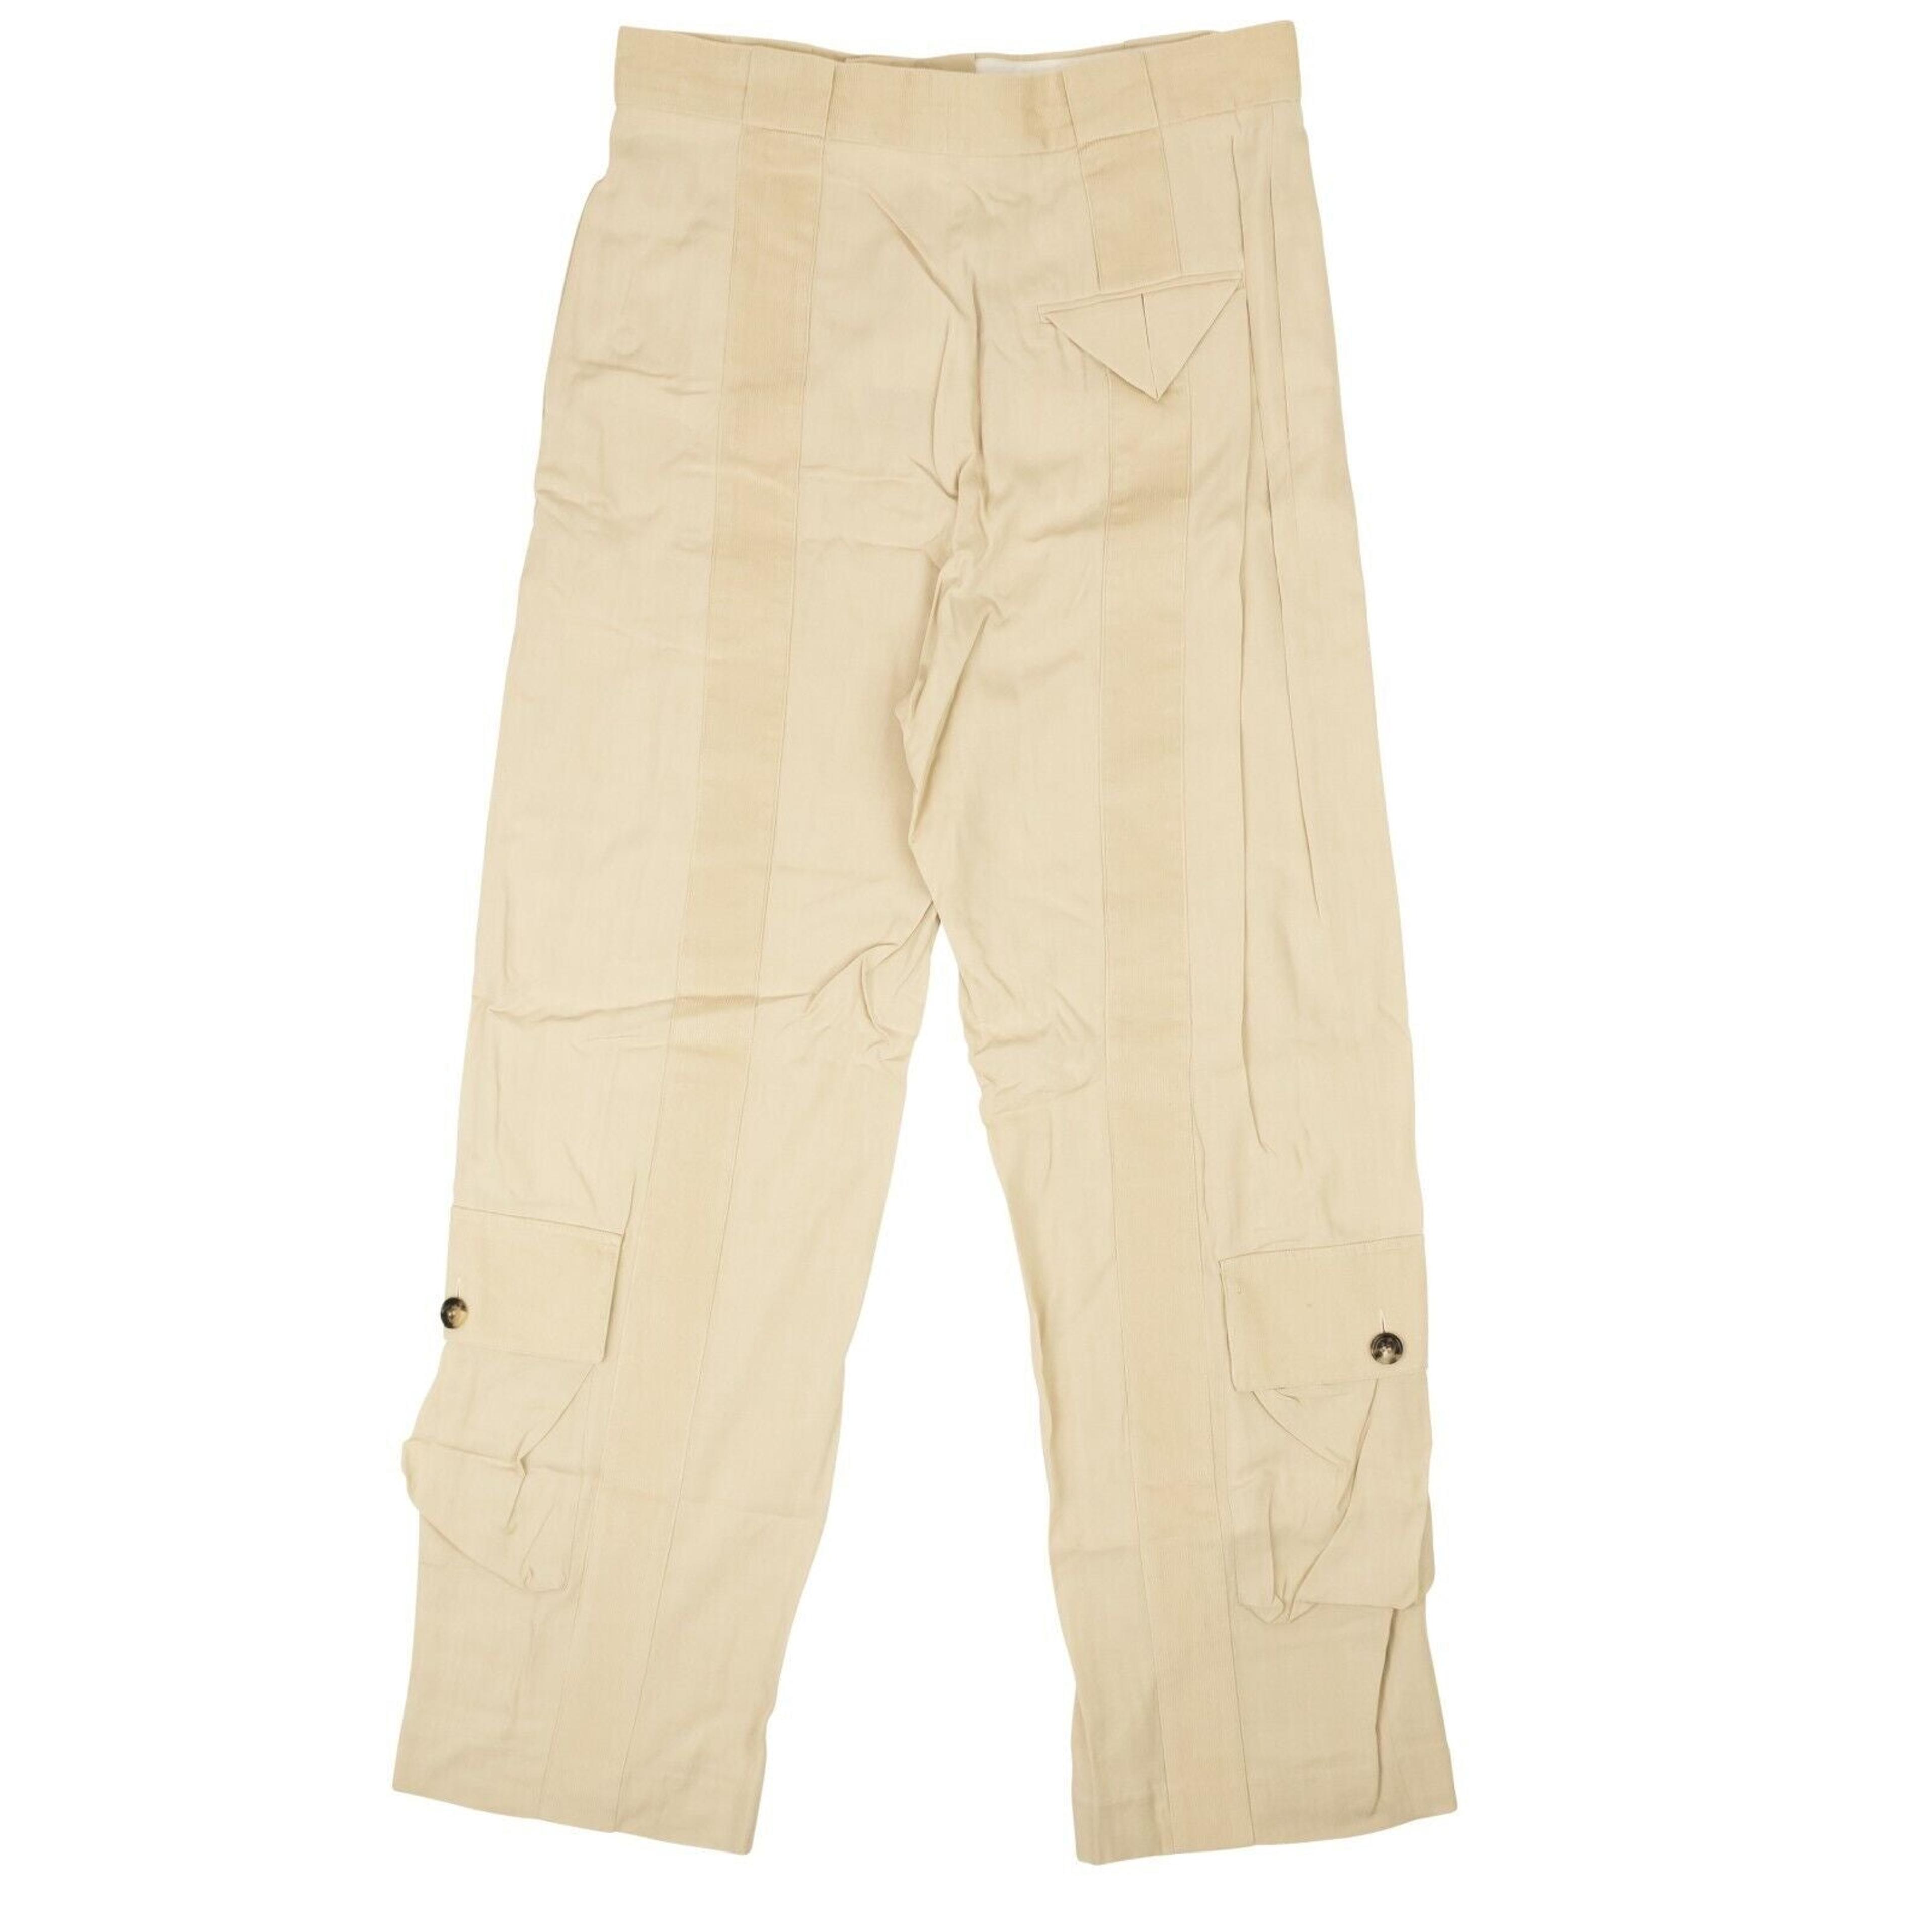 Alternate View 3 of Straw Tan Corduroy Accent Panel Pants